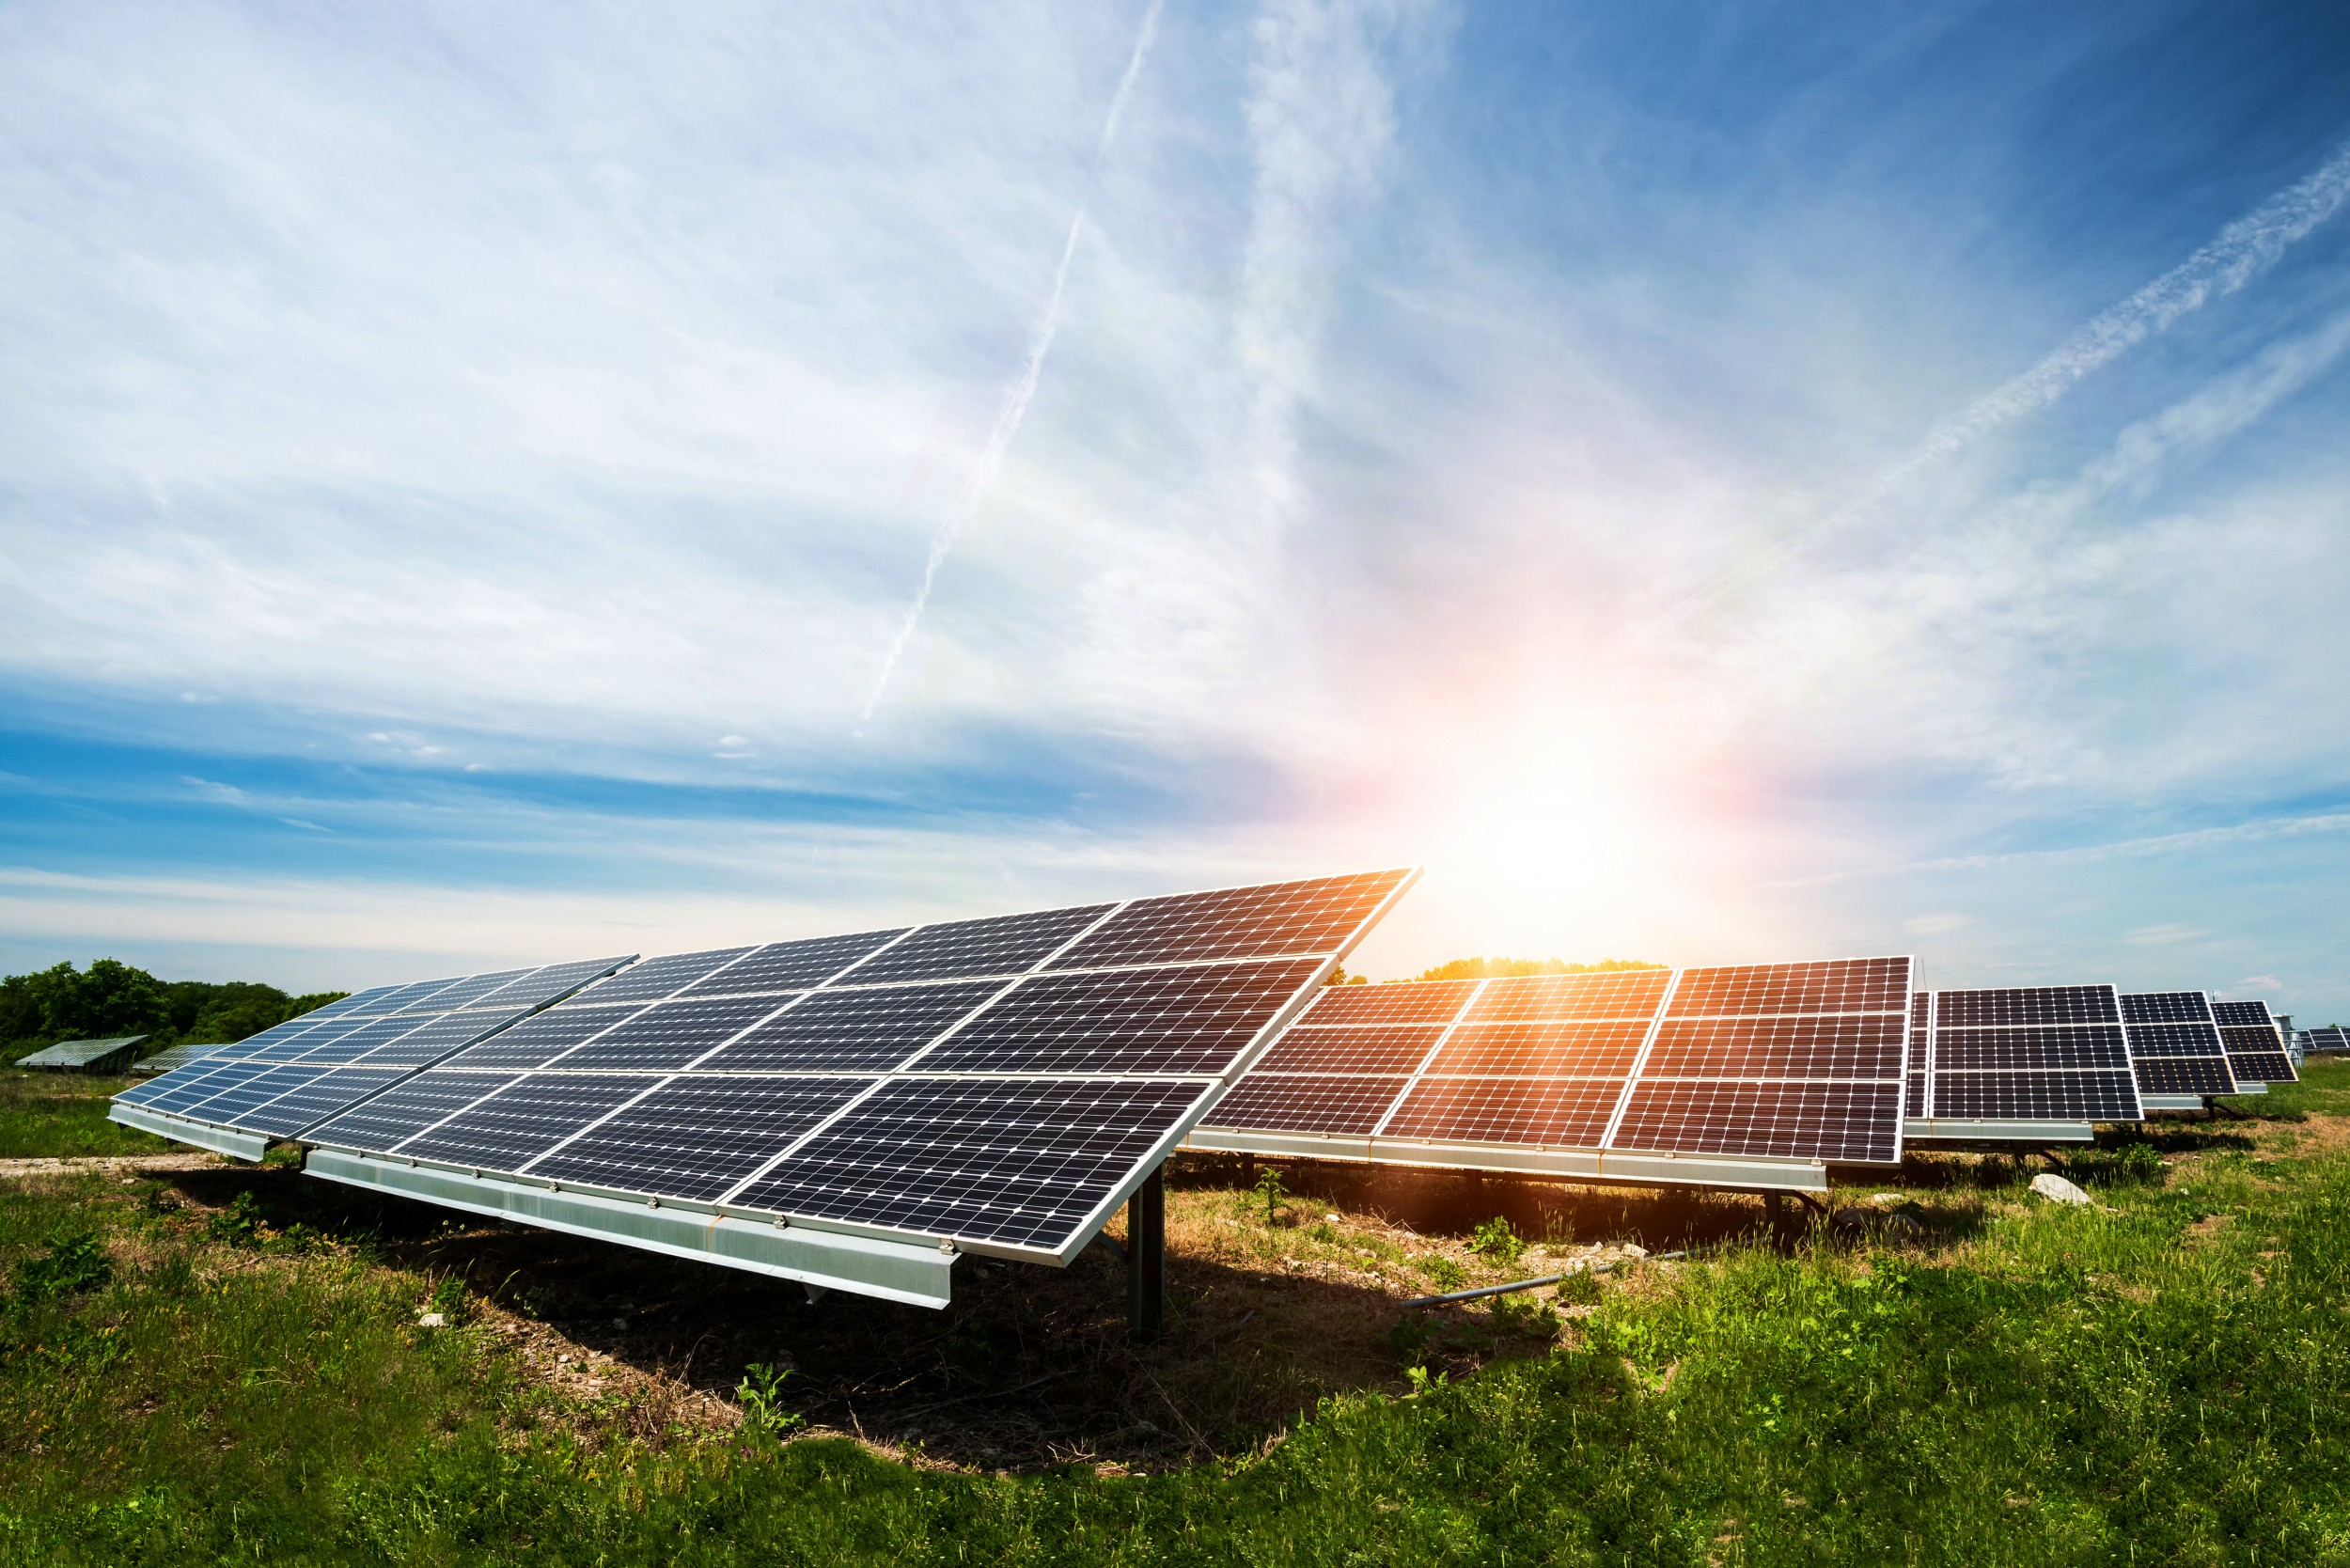 The expansion of solar energy poses the system with challenges.